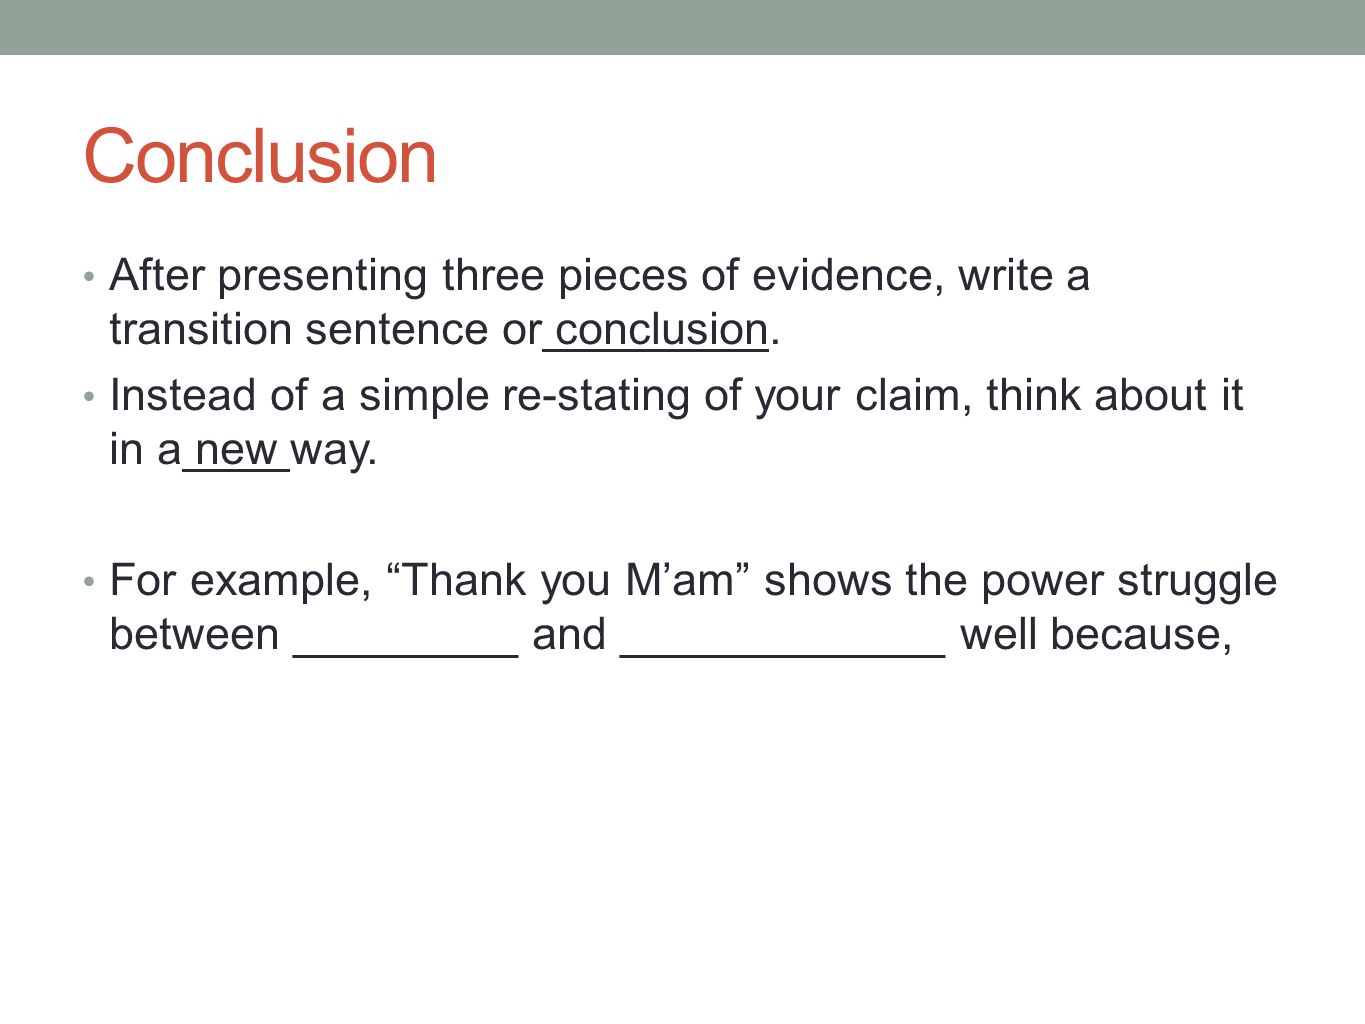 How to write a conclusion transition sentence